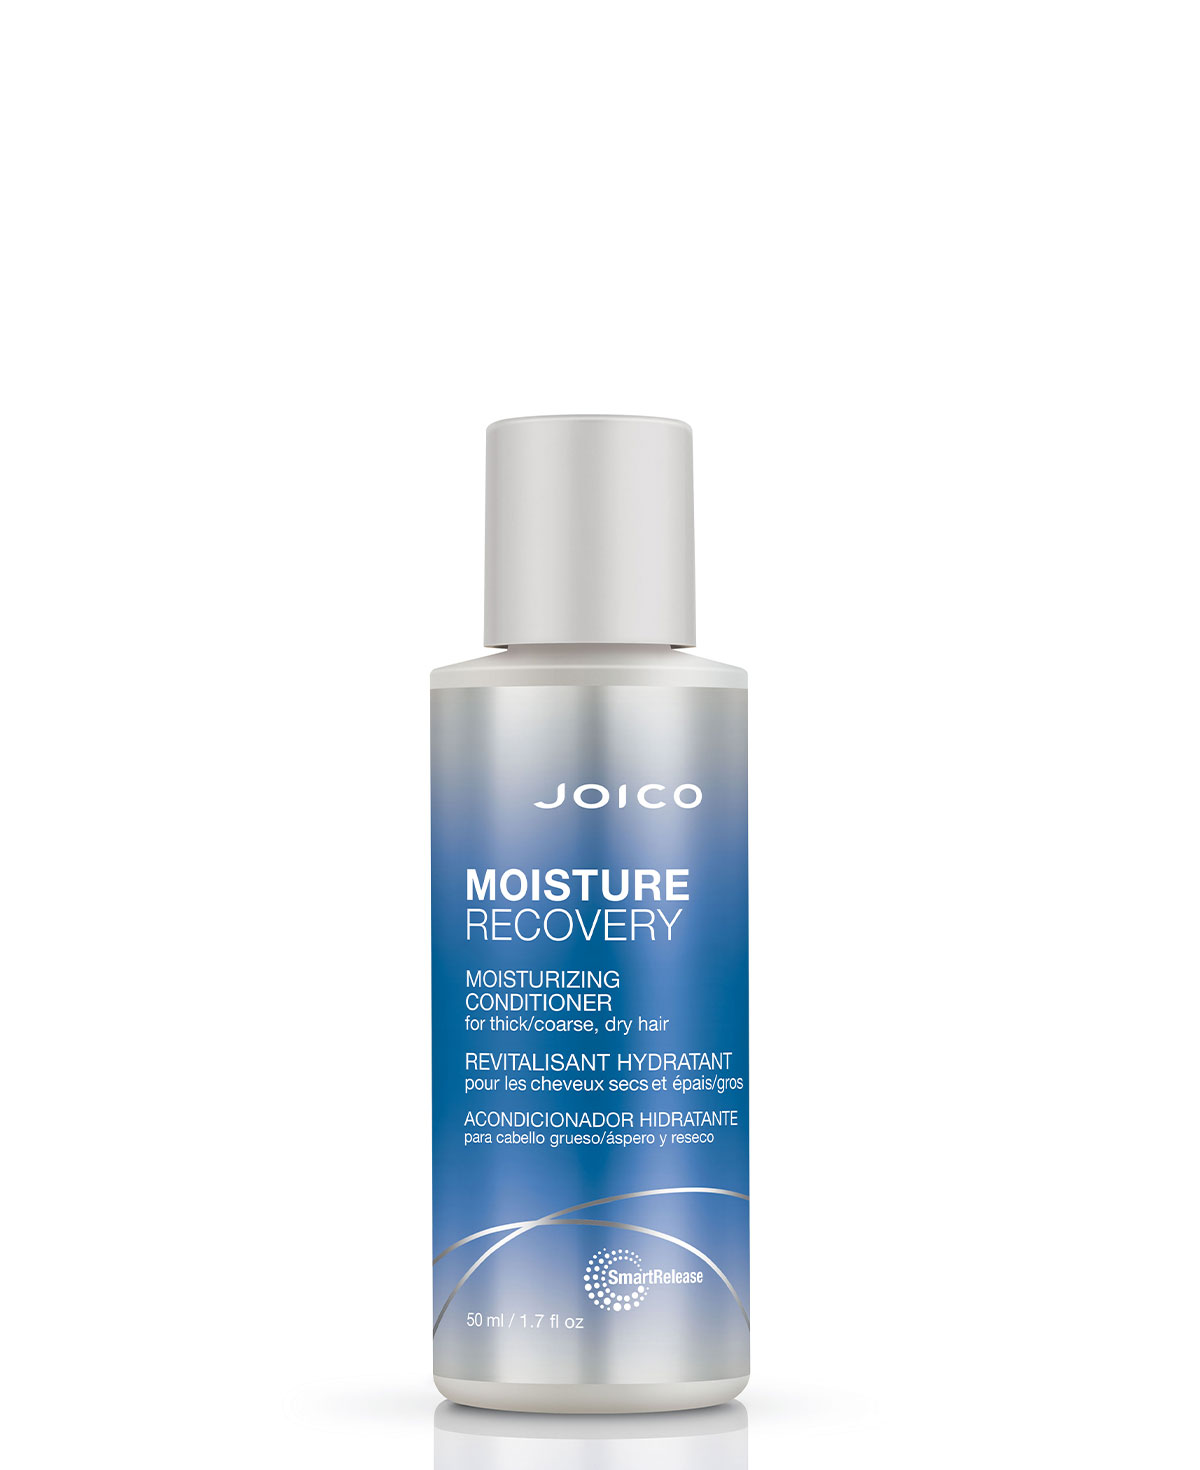 Joico Moisture Recovery Conditioner 50ml